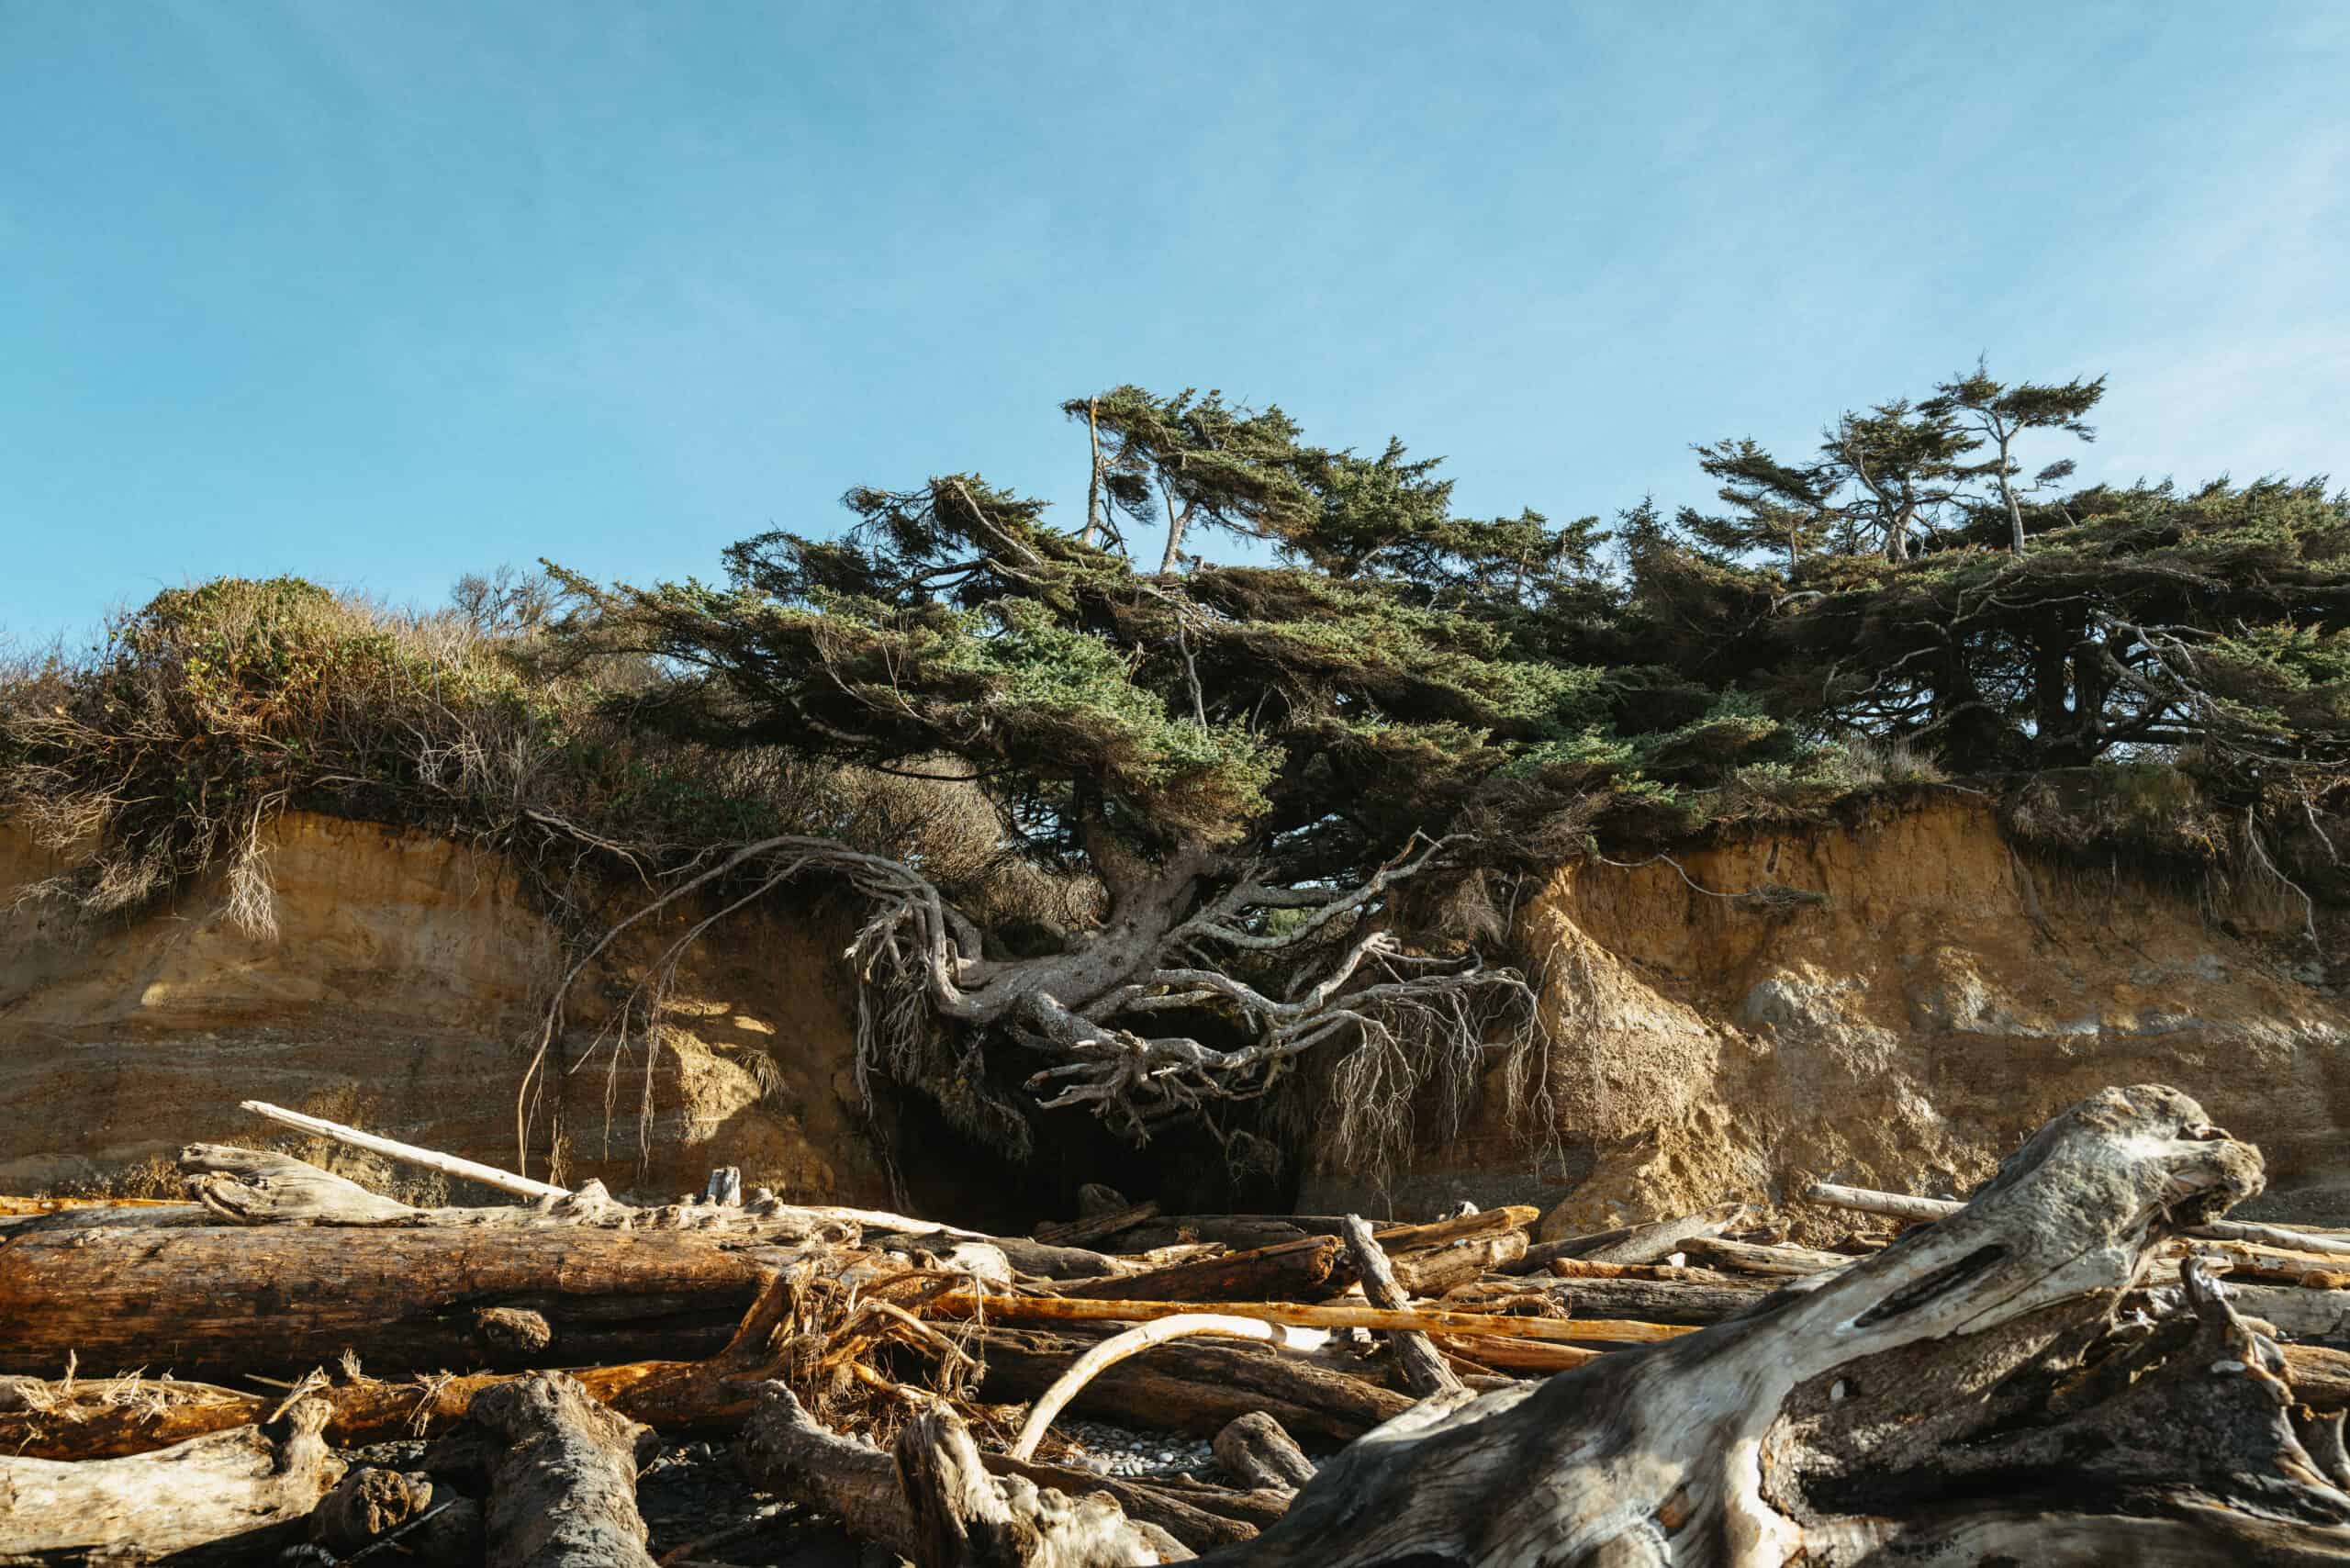 How To Get To The Kalaloch Tree of Life (24 Magical Hours at Kalaloch Lodge, WA)